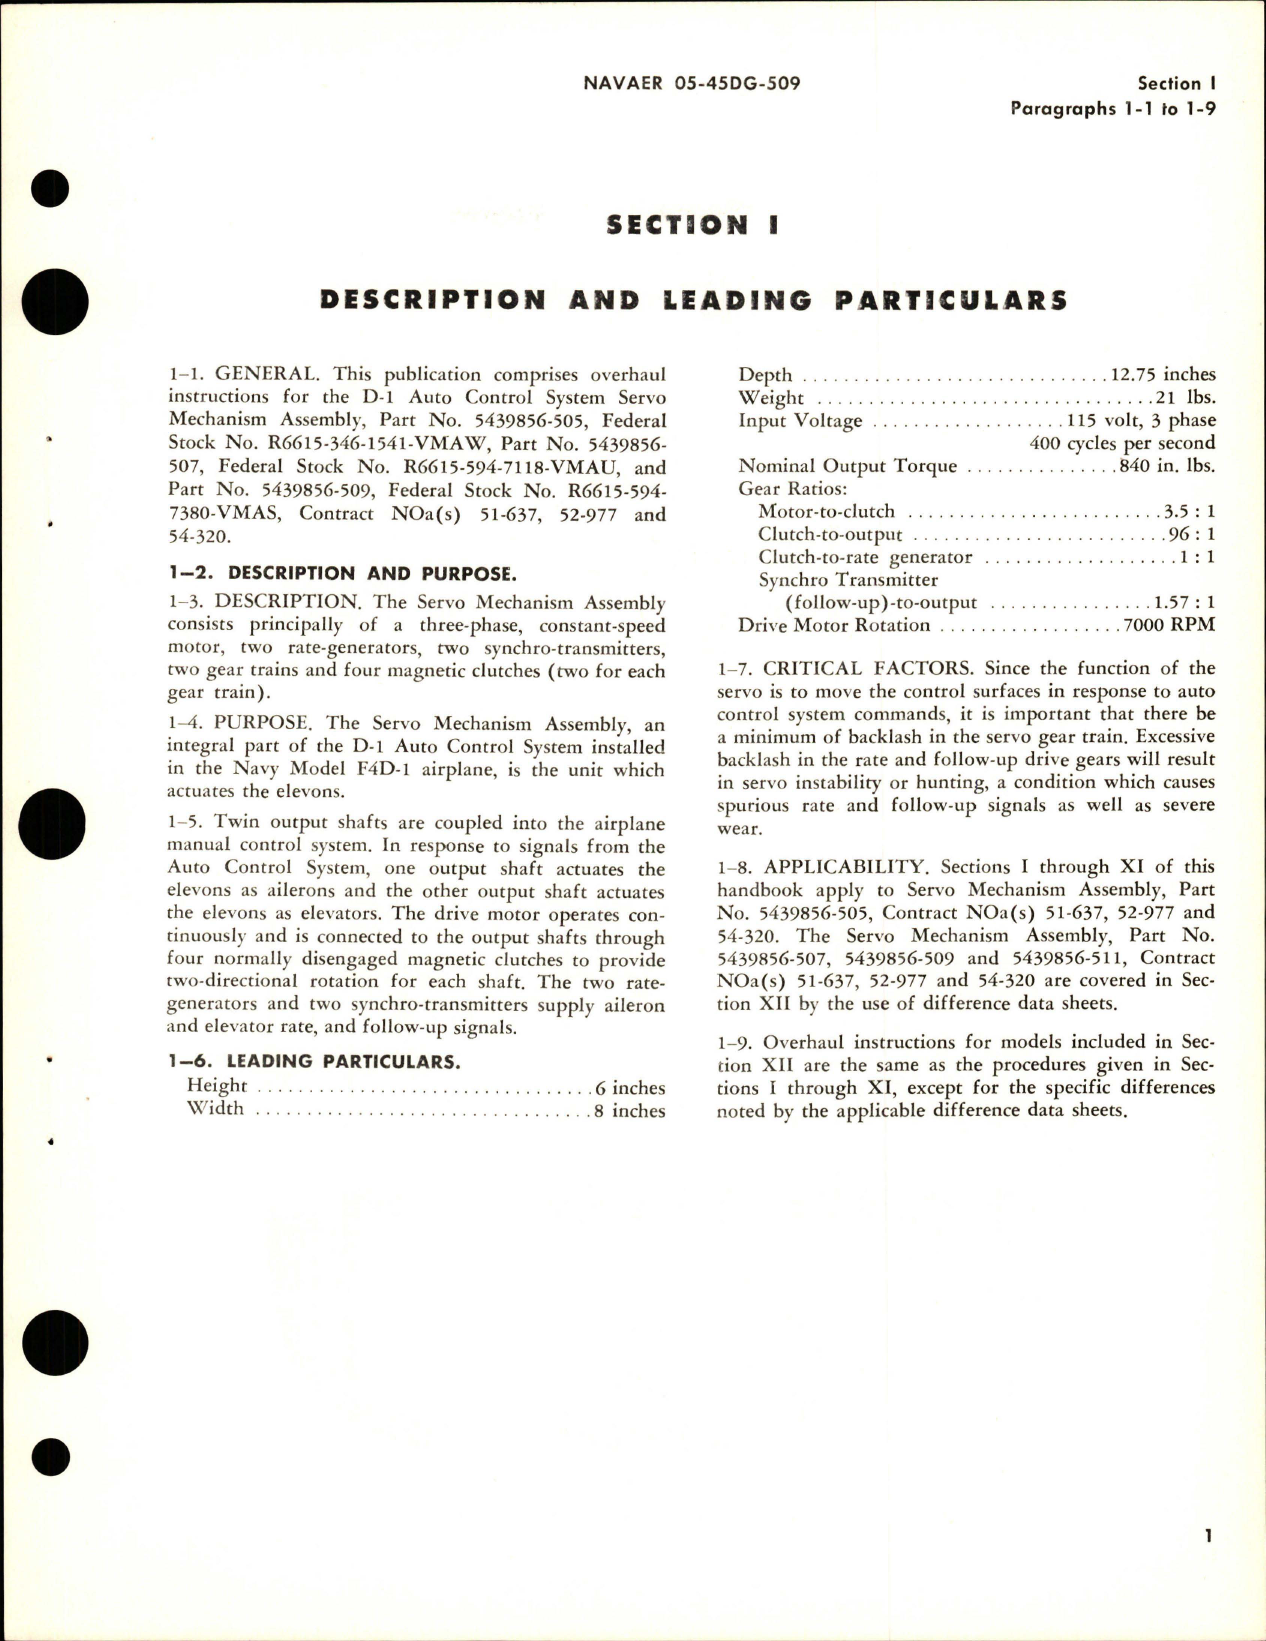 Sample page 7 from AirCorps Library document: Overhaul Instructions for Servo Mechanism Assembly for D-1 Auto Control System